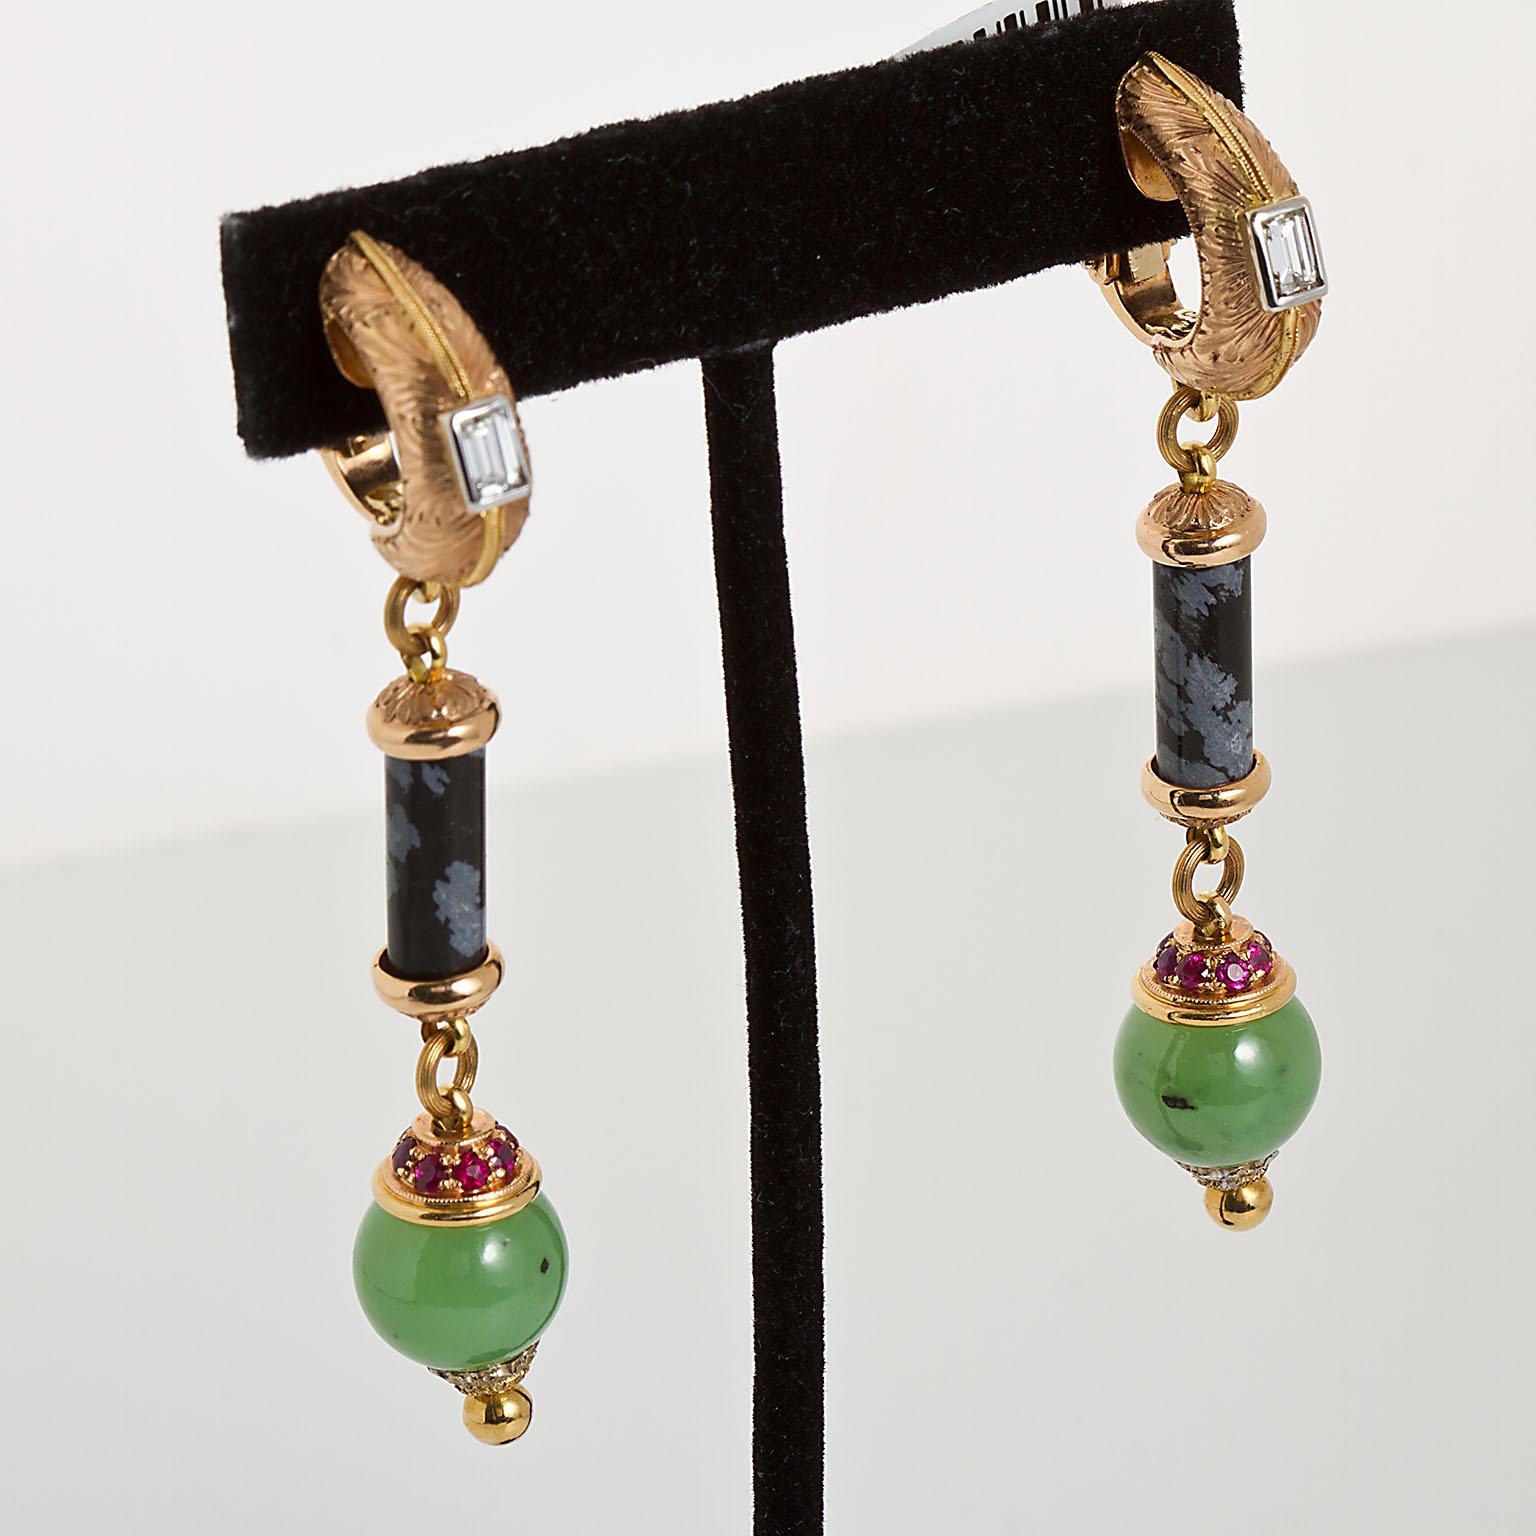 A remarkable pair of dangle earrings created by the master Angelo Giorgio Cazzaniga.    Intricately etched earrings set with two baguette cut diamonds with a black columnar onyx snow center and a pair of polished round nephrite bordered with round